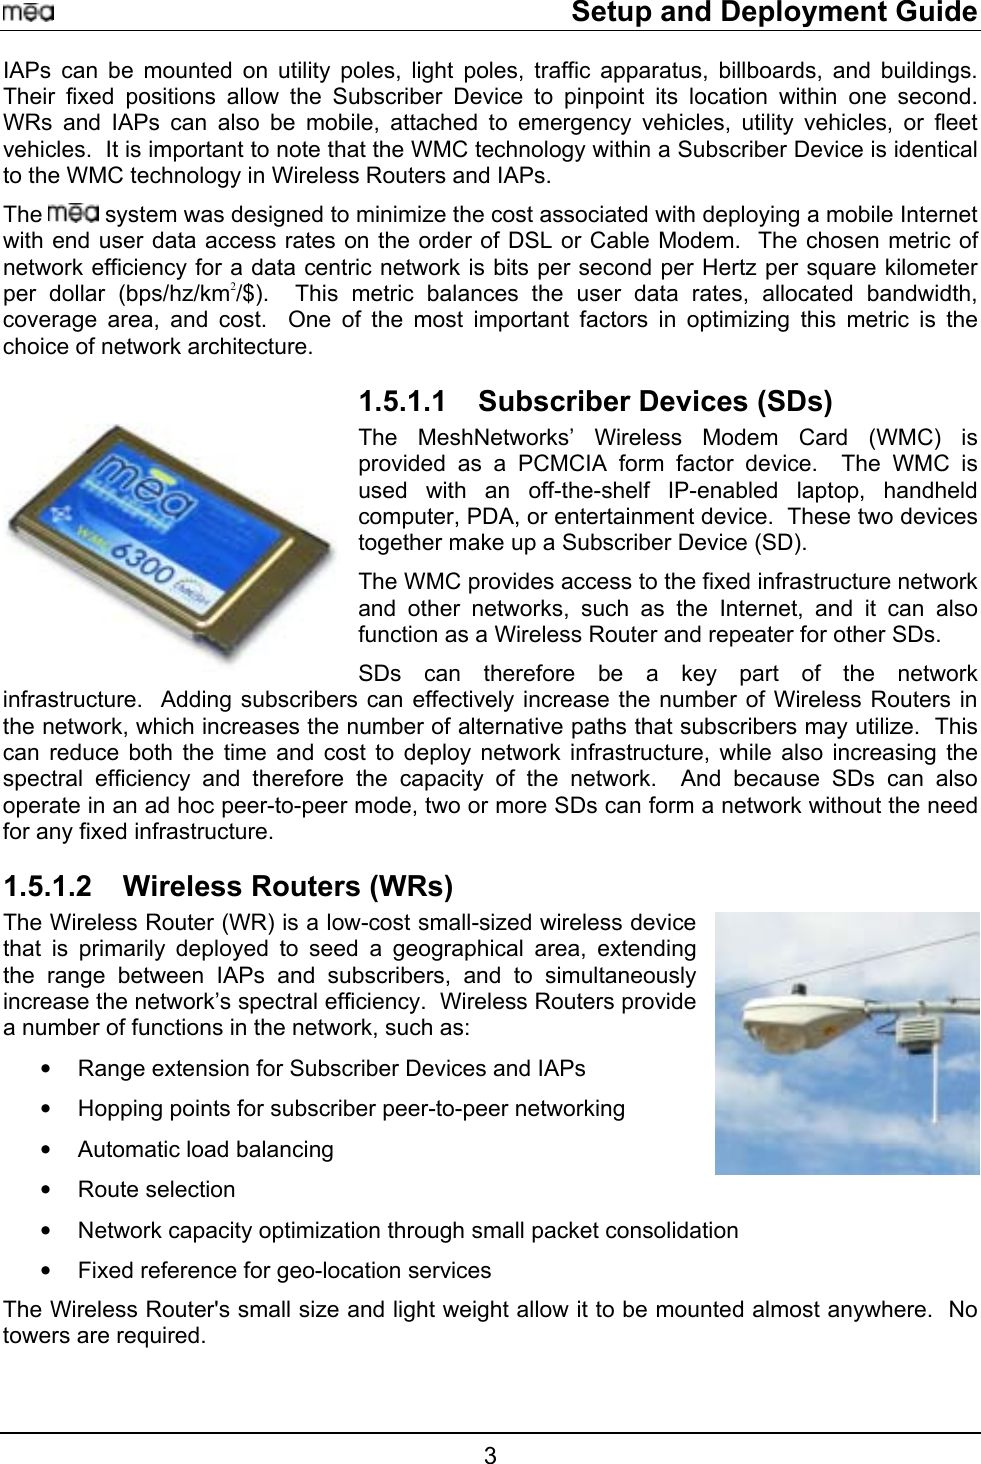     Setup and Deployment Guide IAPs can be mounted on utility poles, light poles, traffic apparatus, billboards, and buildings.  Their fixed positions allow the Subscriber Device to pinpoint its location within one second.  WRs and IAPs can also be mobile, attached to emergency vehicles, utility vehicles, or fleet vehicles.  It is important to note that the WMC technology within a Subscriber Device is identical to the WMC technology in Wireless Routers and IAPs.  The   system was designed to minimize the cost associated with deploying a mobile Internet with end user data access rates on the order of DSL or Cable Modem.  The chosen metric of network efficiency for a data centric network is bits per second per Hertz per square kilometer per dollar (bps/hz/km2/$).  This metric balances the user data rates, allocated bandwidth, coverage area, and cost.  One of the most important factors in optimizing this metric is the choice of network architecture. 1.5.1.1  Subscriber Devices (SDs) The MeshNetworks’ Wireless Modem Card (WMC) is provided as a PCMCIA form factor device.  The WMC is used with an off-the-shelf IP-enabled laptop, handheld computer, PDA, or entertainment device.  These two devices together make up a Subscriber Device (SD). The WMC provides access to the fixed infrastructure network and other networks, such as the Internet, and it can also function as a Wireless Router and repeater for other SDs.  SDs can therefore be a key part of the network infrastructure.  Adding subscribers can effectively increase the number of Wireless Routers in the network, which increases the number of alternative paths that subscribers may utilize.  This can reduce both the time and cost to deploy network infrastructure, while also increasing the spectral efficiency and therefore the capacity of the network.  And because SDs can also operate in an ad hoc peer-to-peer mode, two or more SDs can form a network without the need for any fixed infrastructure. 1.5.1.2  Wireless Routers (WRs) The Wireless Router (WR) is a low-cost small-sized wireless device that is primarily deployed to seed a geographical area, extending the range between IAPs and subscribers, and to simultaneously increase the network’s spectral efficiency.  Wireless Routers provide a number of functions in the network, such as: •  Range extension for Subscriber Devices and IAPs  •  Hopping points for subscriber peer-to-peer networking  •  Automatic load balancing  •  Route selection •  Network capacity optimization through small packet consolidation •  Fixed reference for geo-location services The Wireless Router&apos;s small size and light weight allow it to be mounted almost anywhere.  No towers are required.   3 